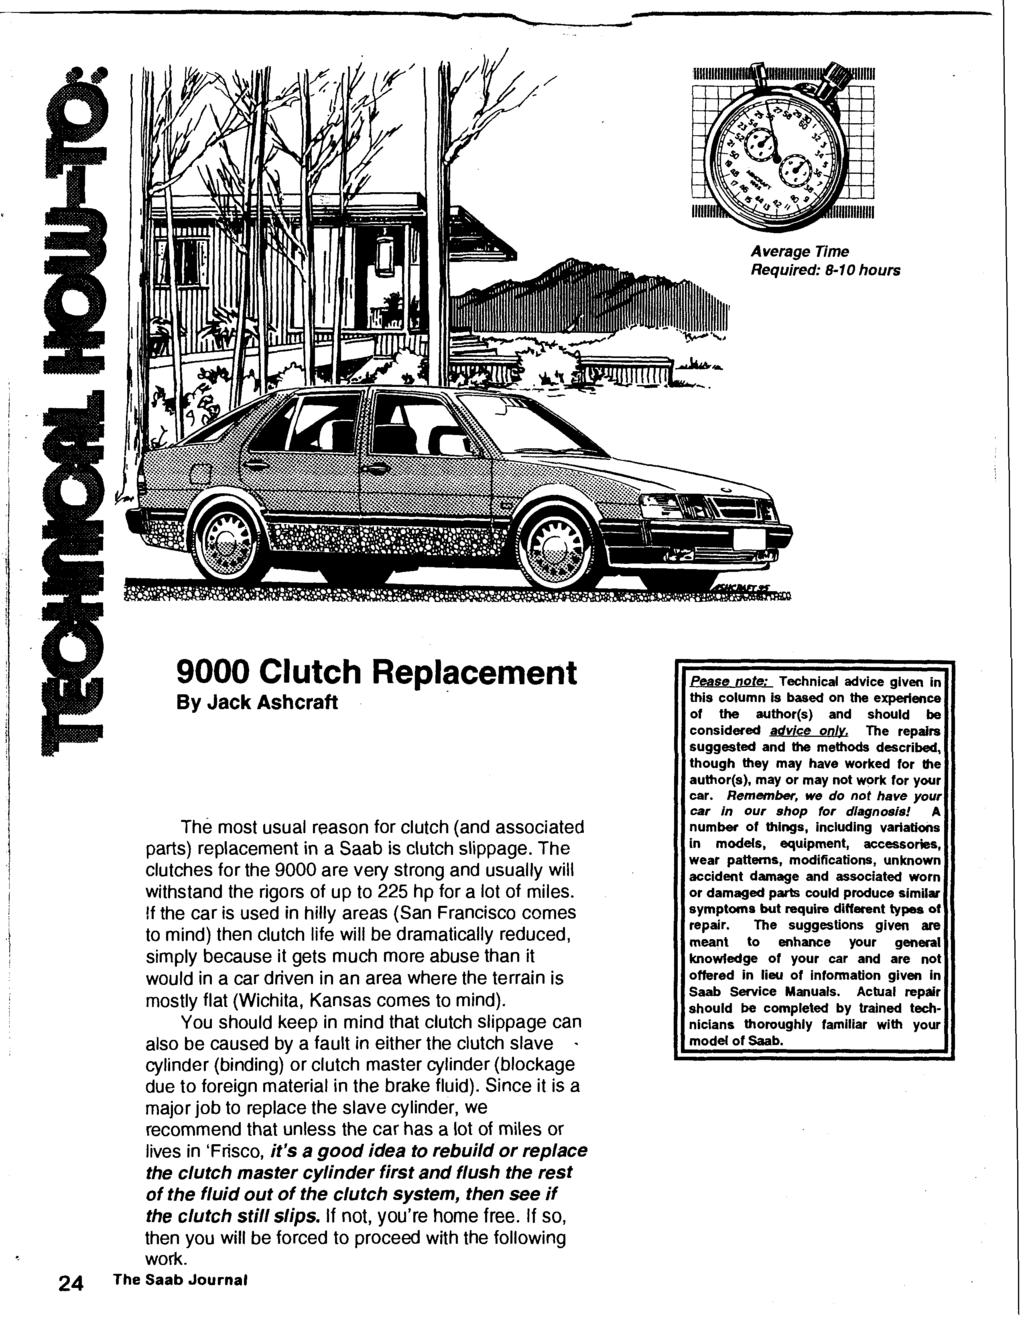 9000 Clutch Replacement By Jack Ashcraft The most usual reason for clutch (and associated parts) replacement in a Saab is clutch slippage.